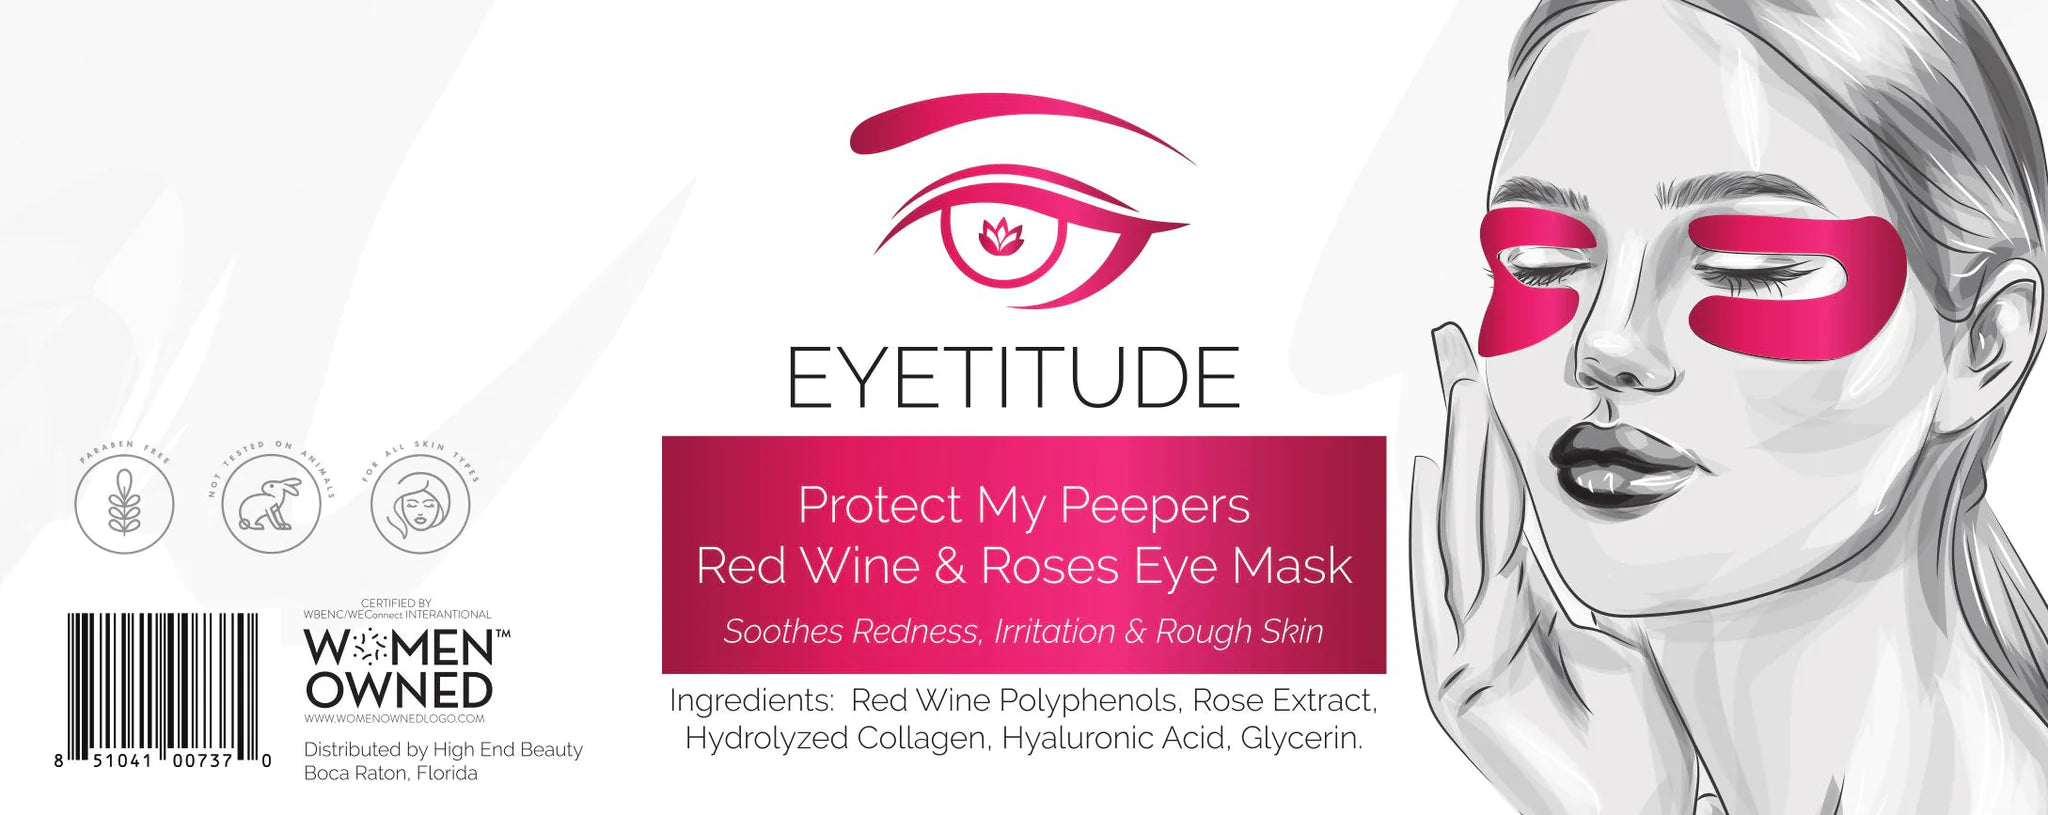 Eyetitude Protect My Peepers Red Wine & Roses Eye Mask